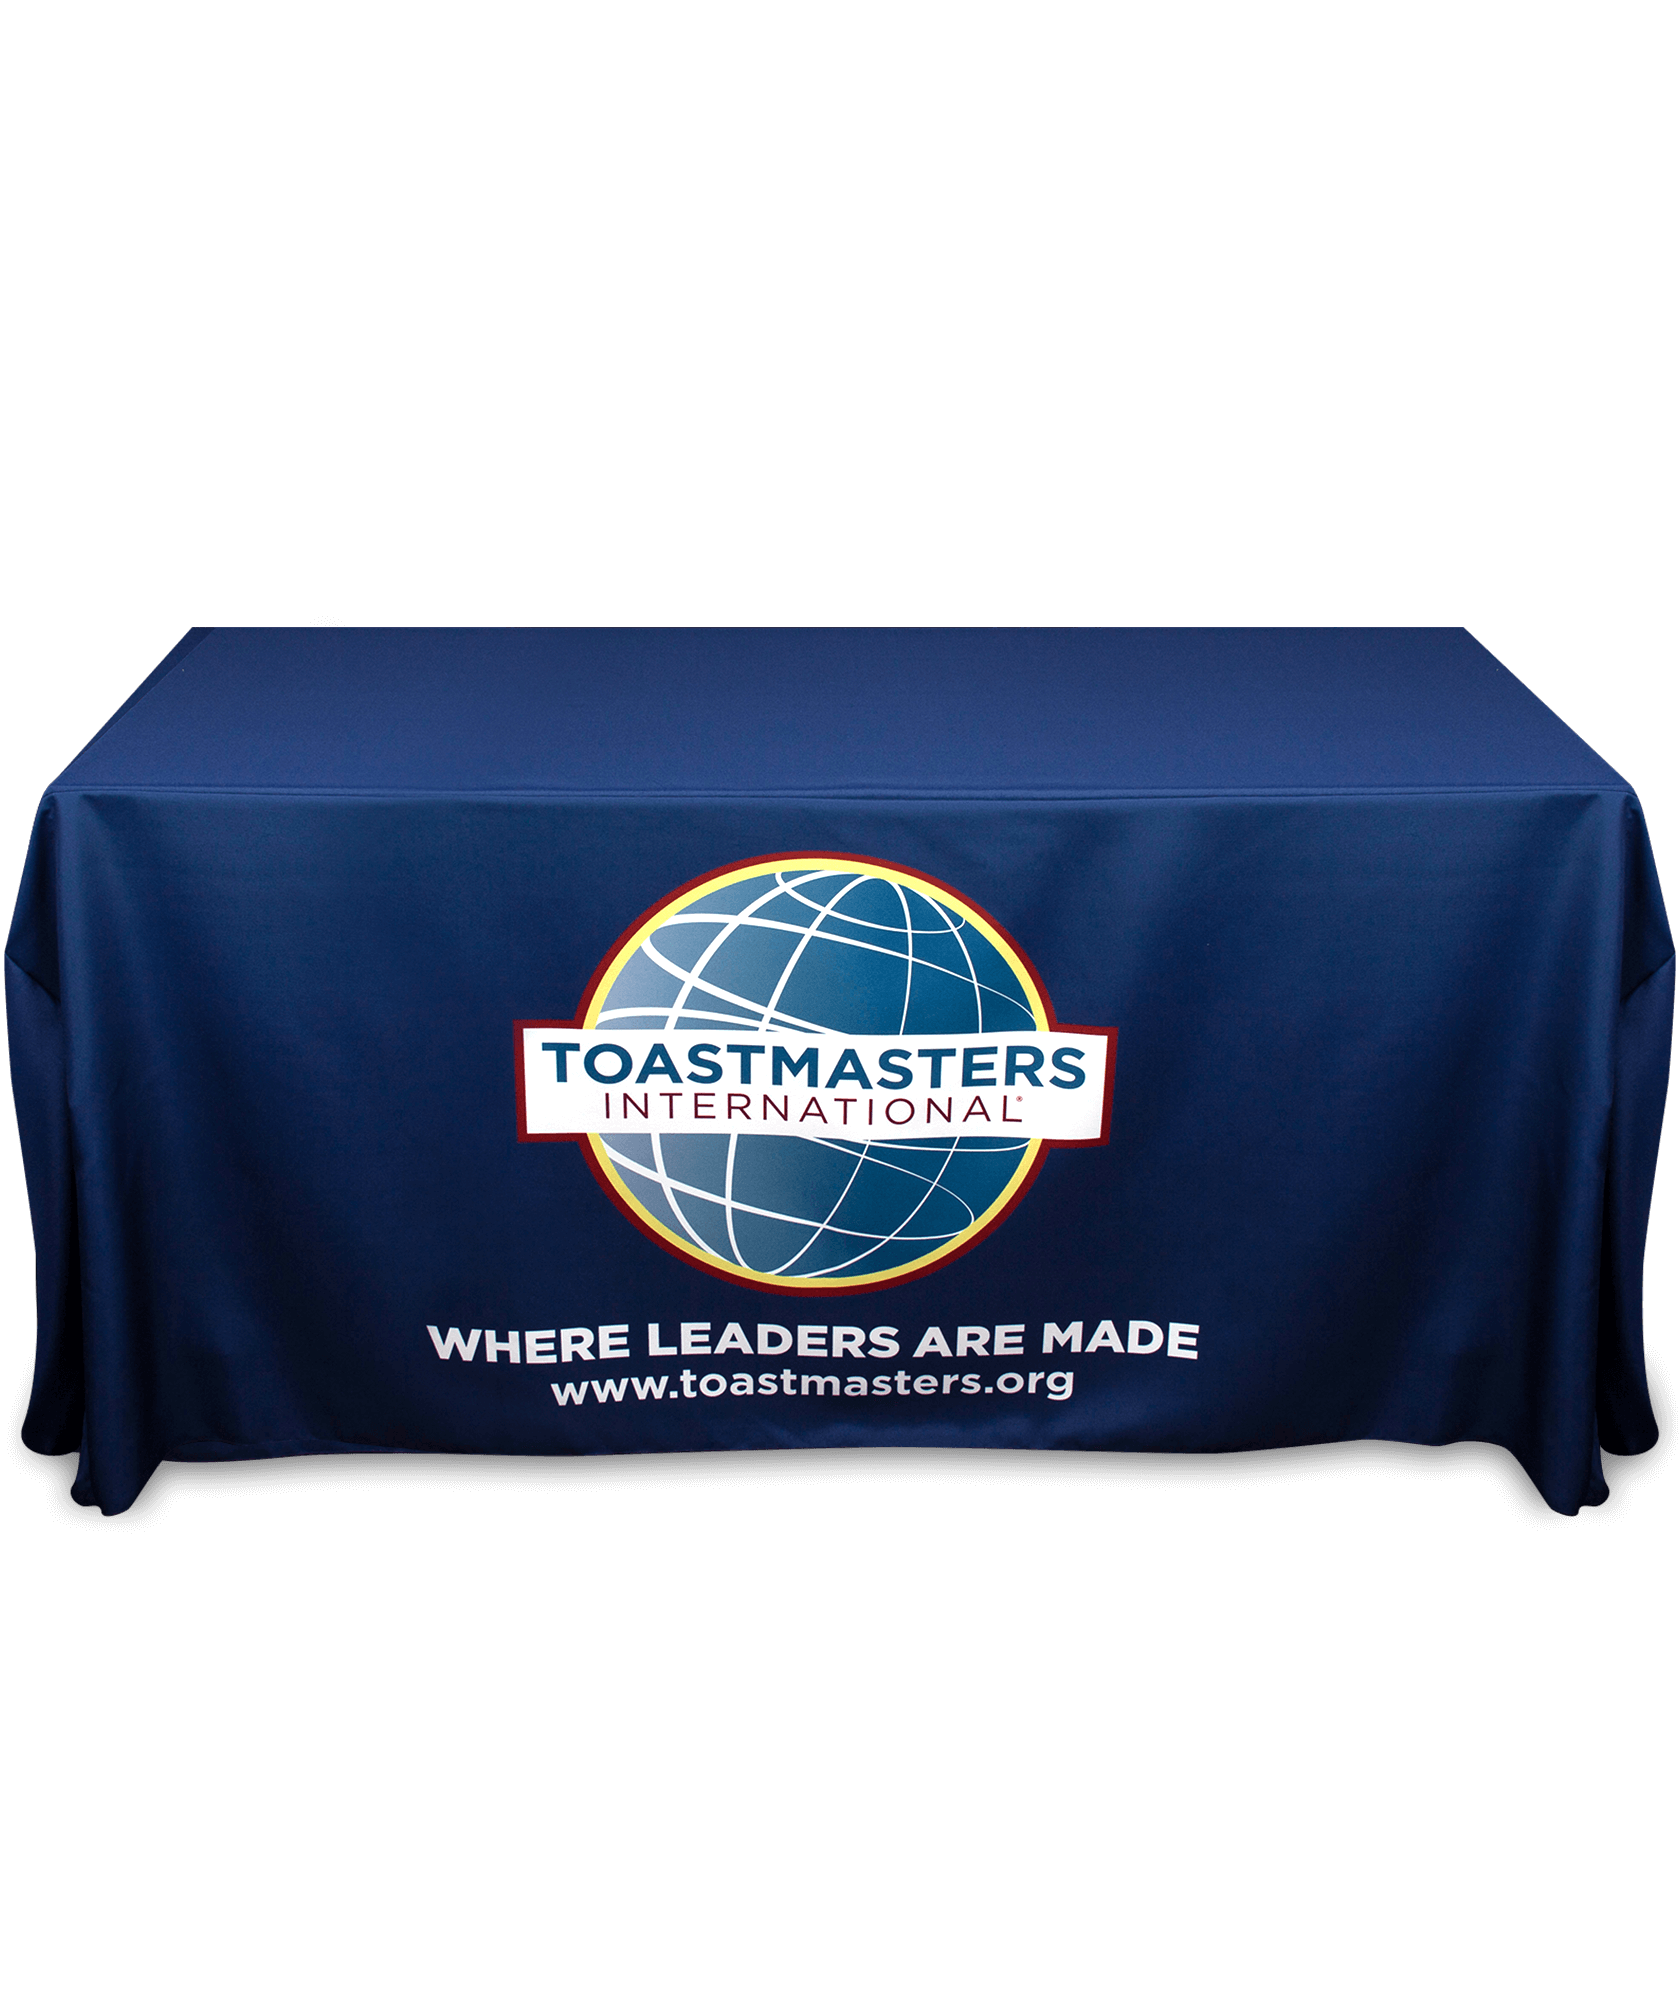 Navy tablecloth with Toastmasters full-color logo, tagline and website